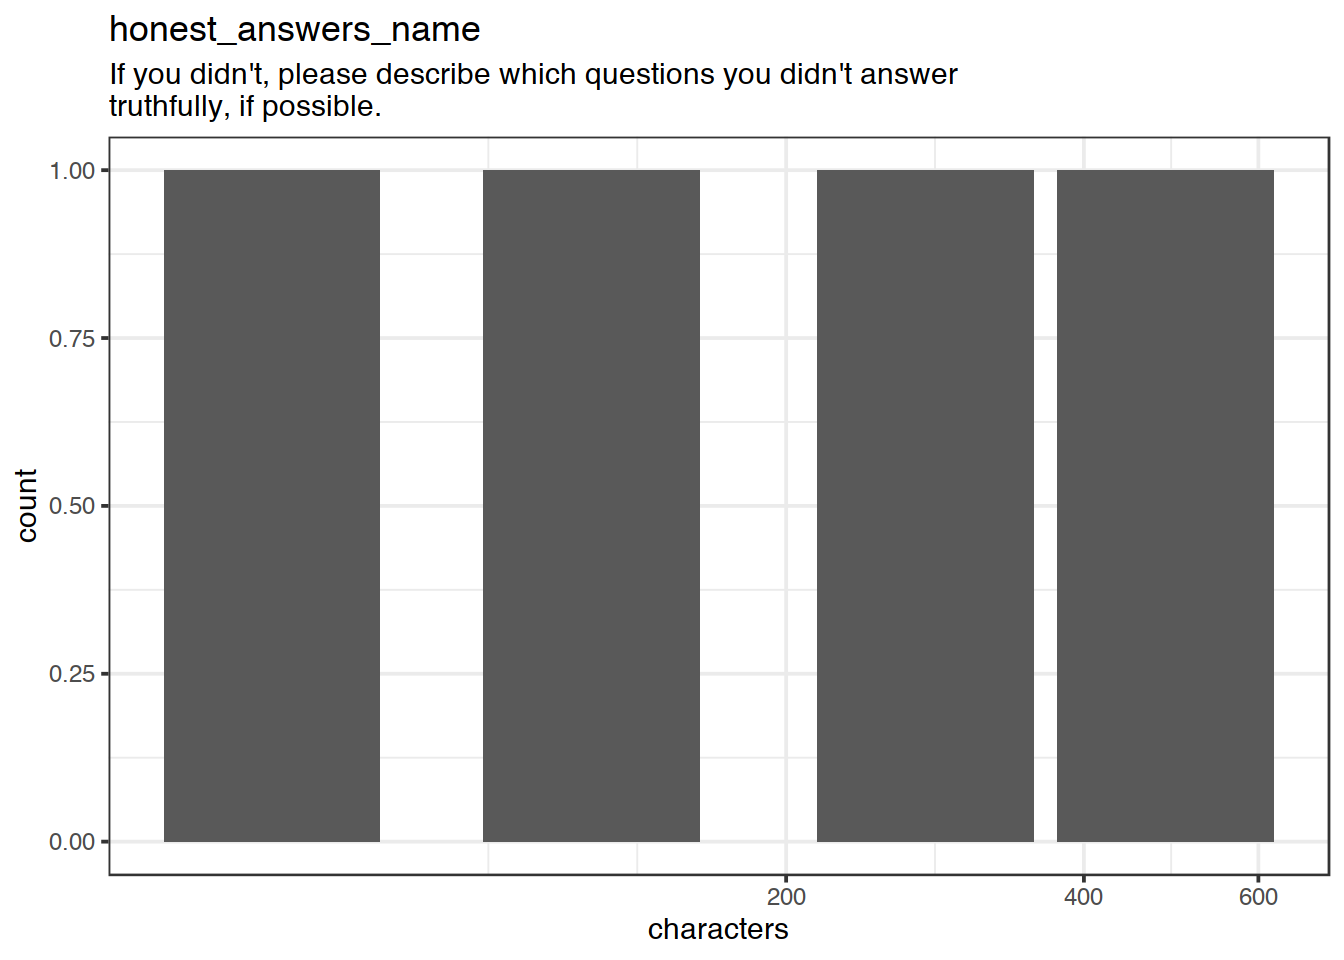 Distribution of values for honest_answers_name